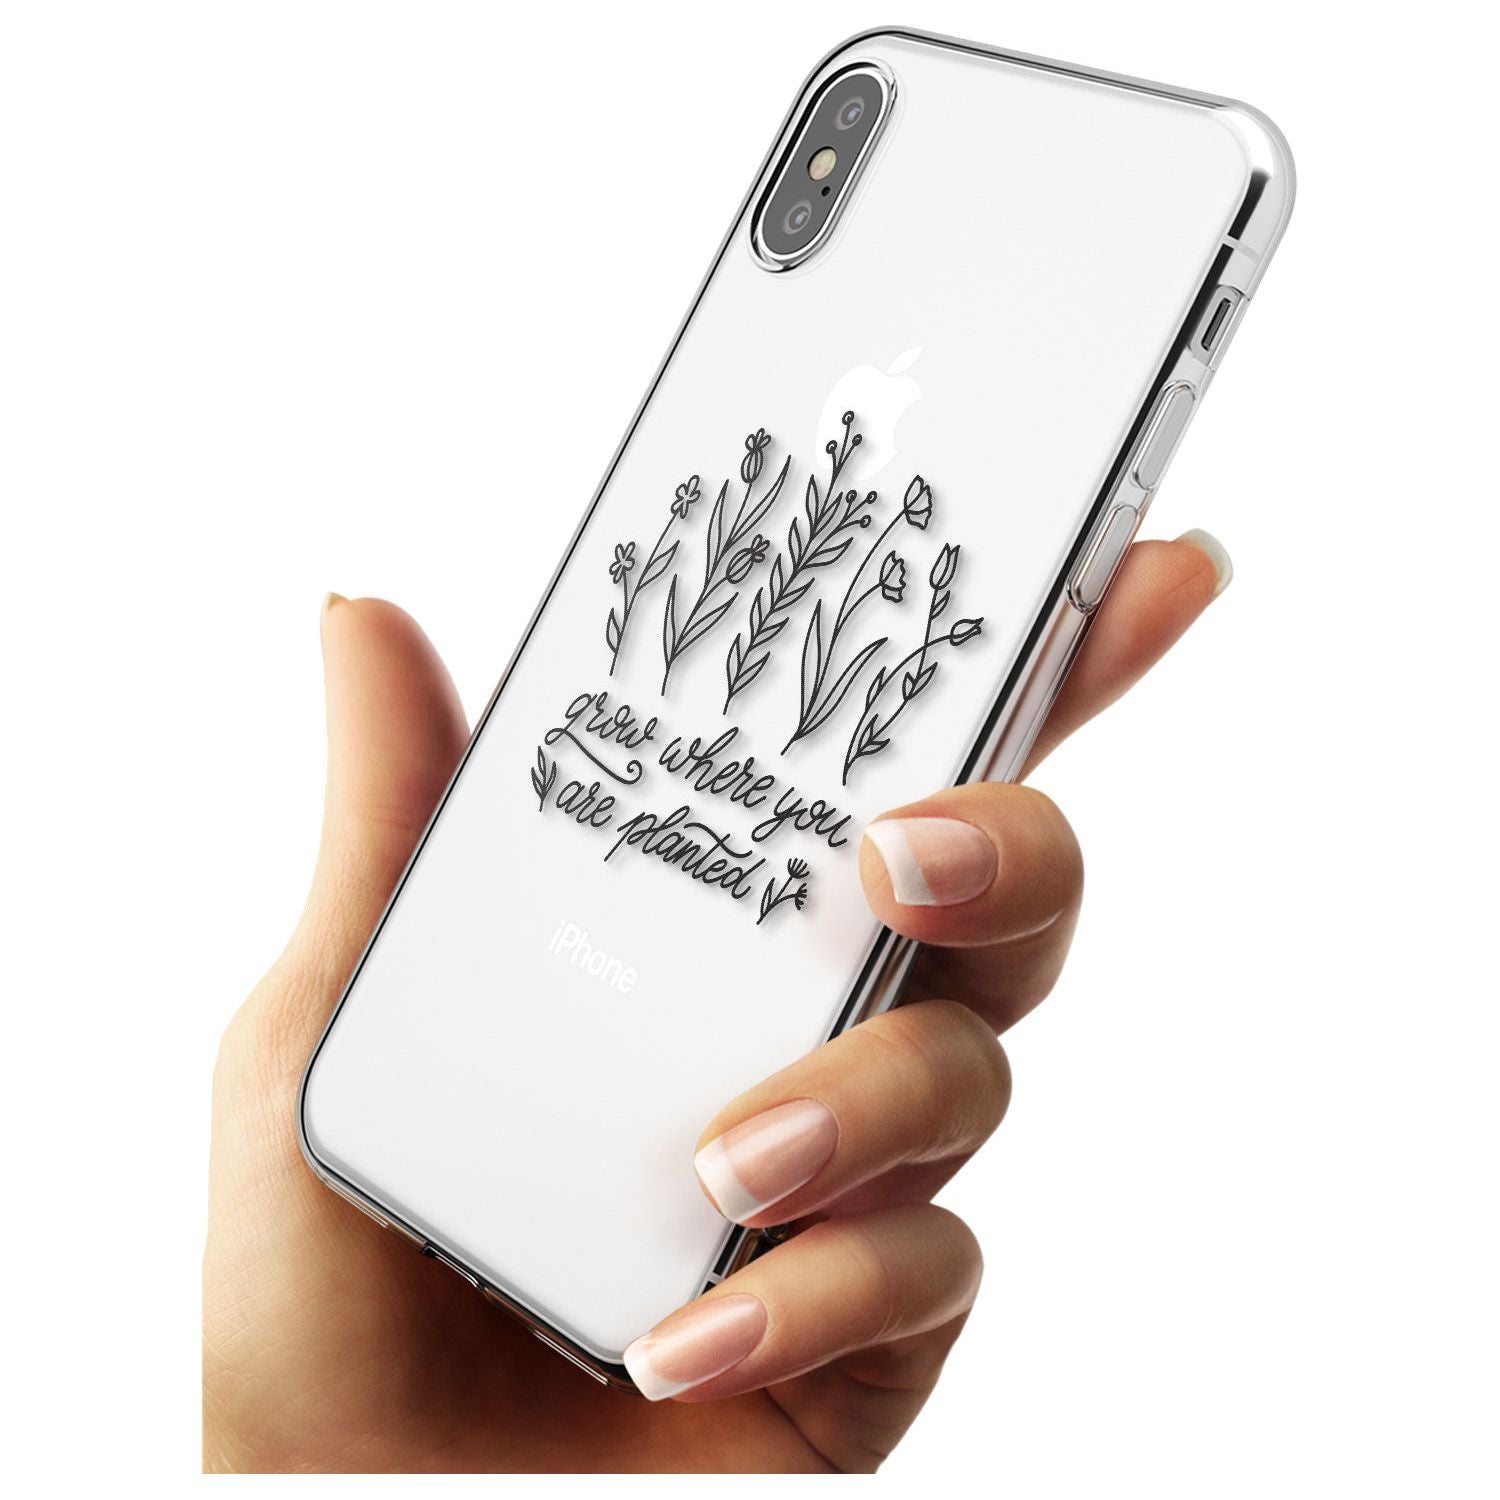 Grow where you are planted Slim TPU Phone Case Warehouse X XS Max XR